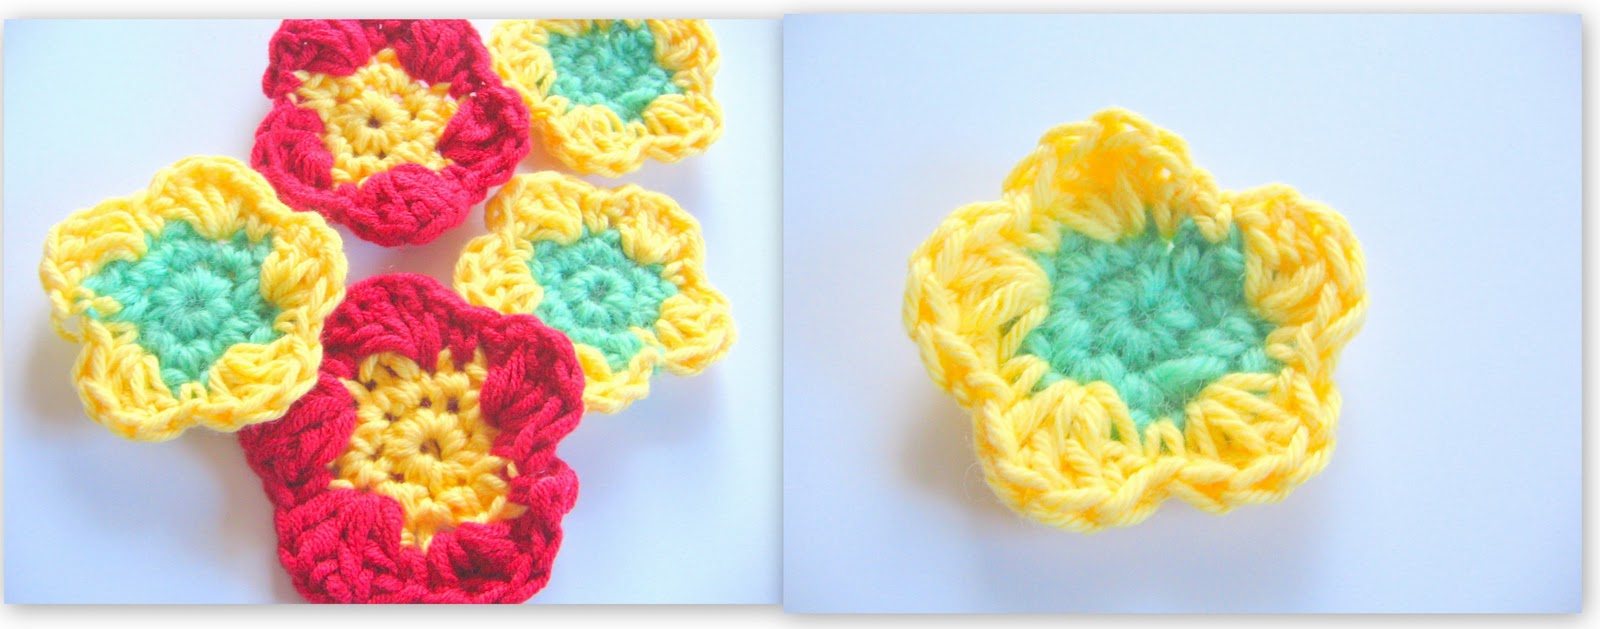 Crochet flower pattern - simple and effective.